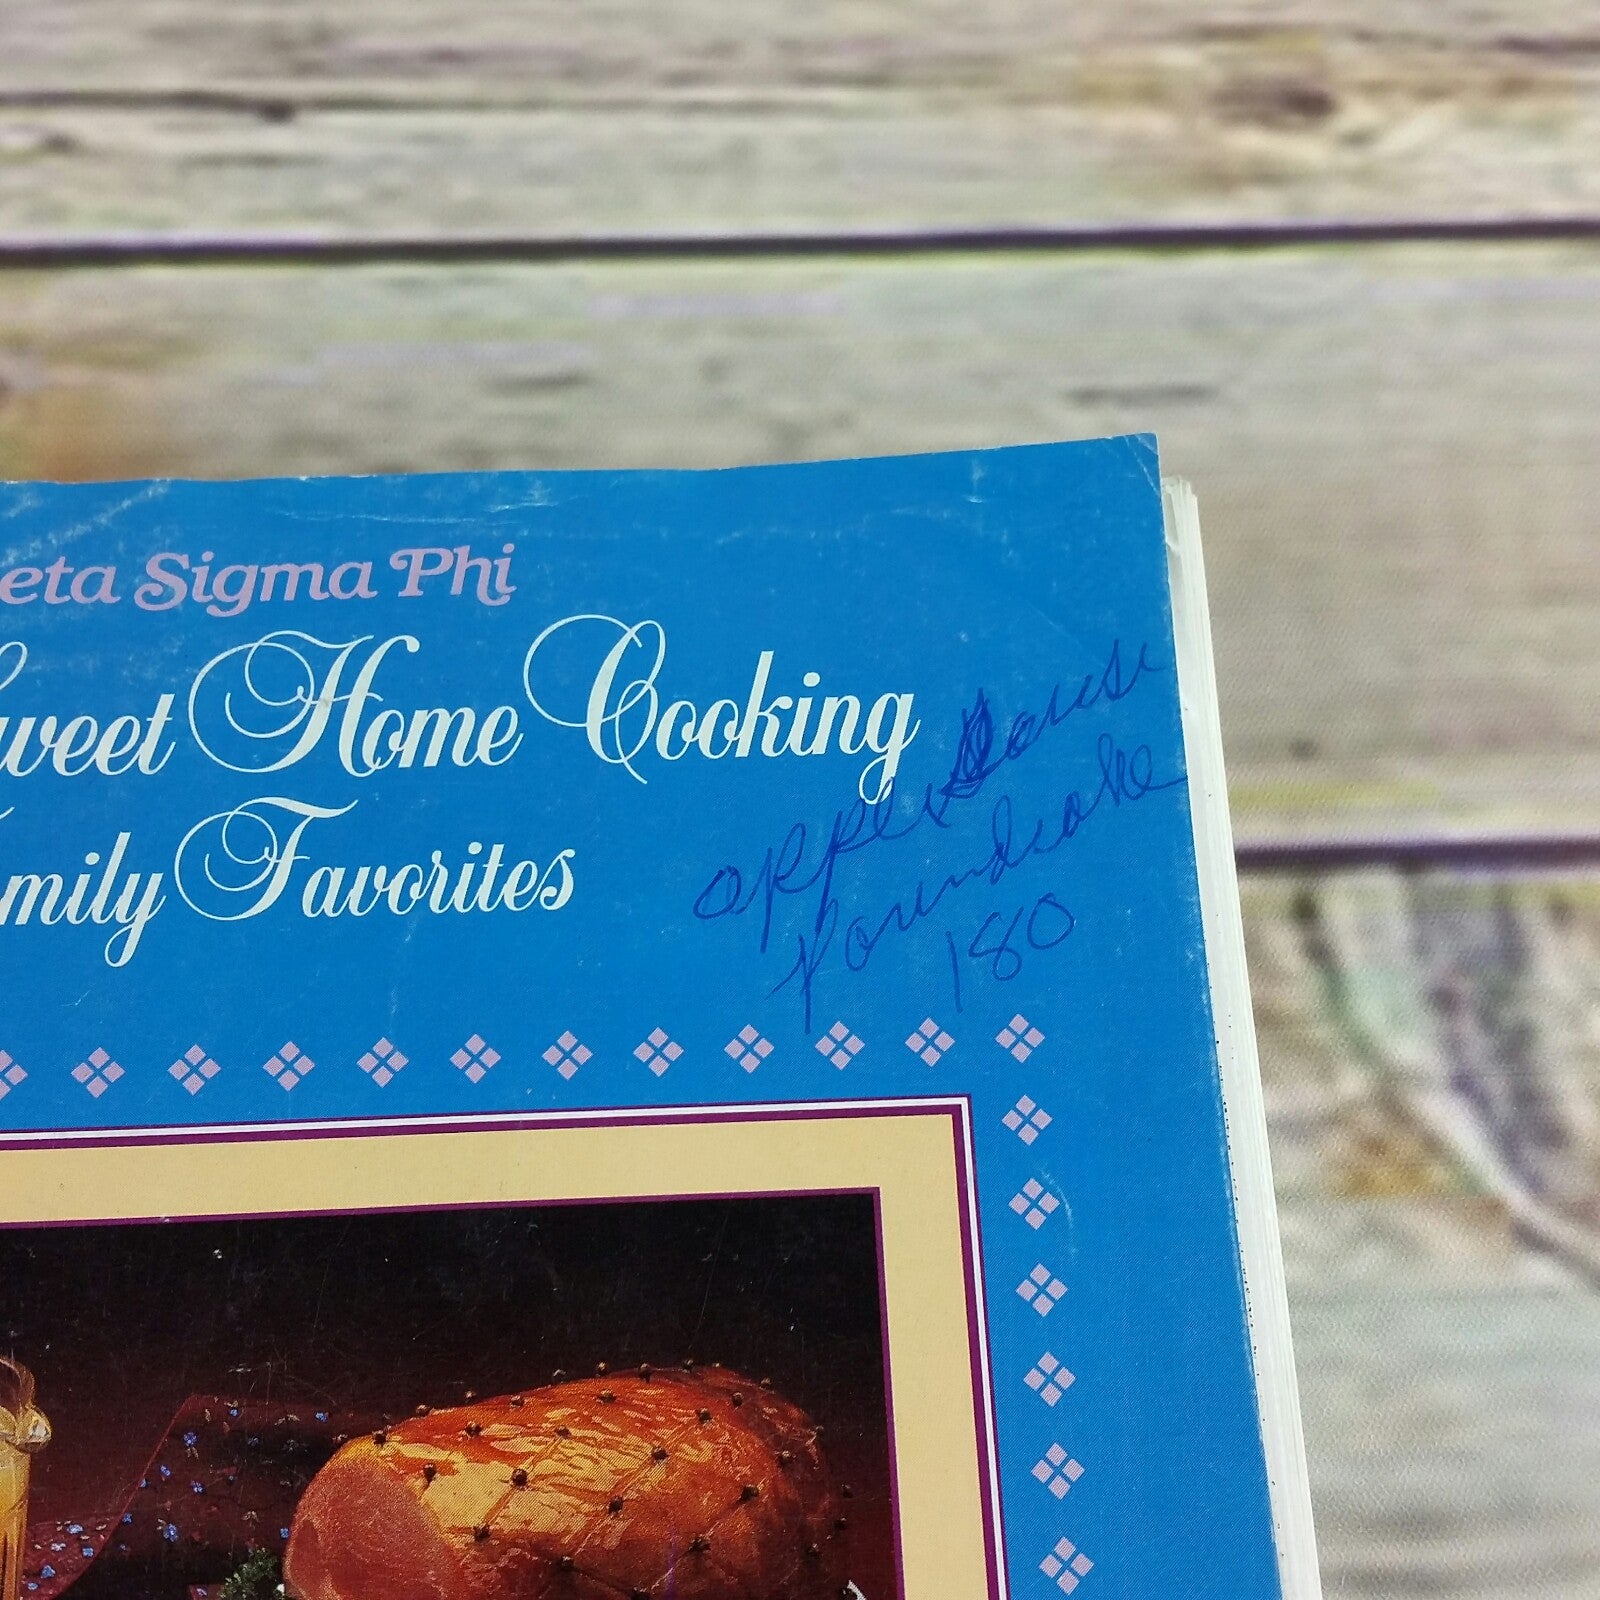 Vintage Cookbook Beta Sigma Phi Home Sweet Home Cooking Family Favorites 1993 - At Grandma's Table